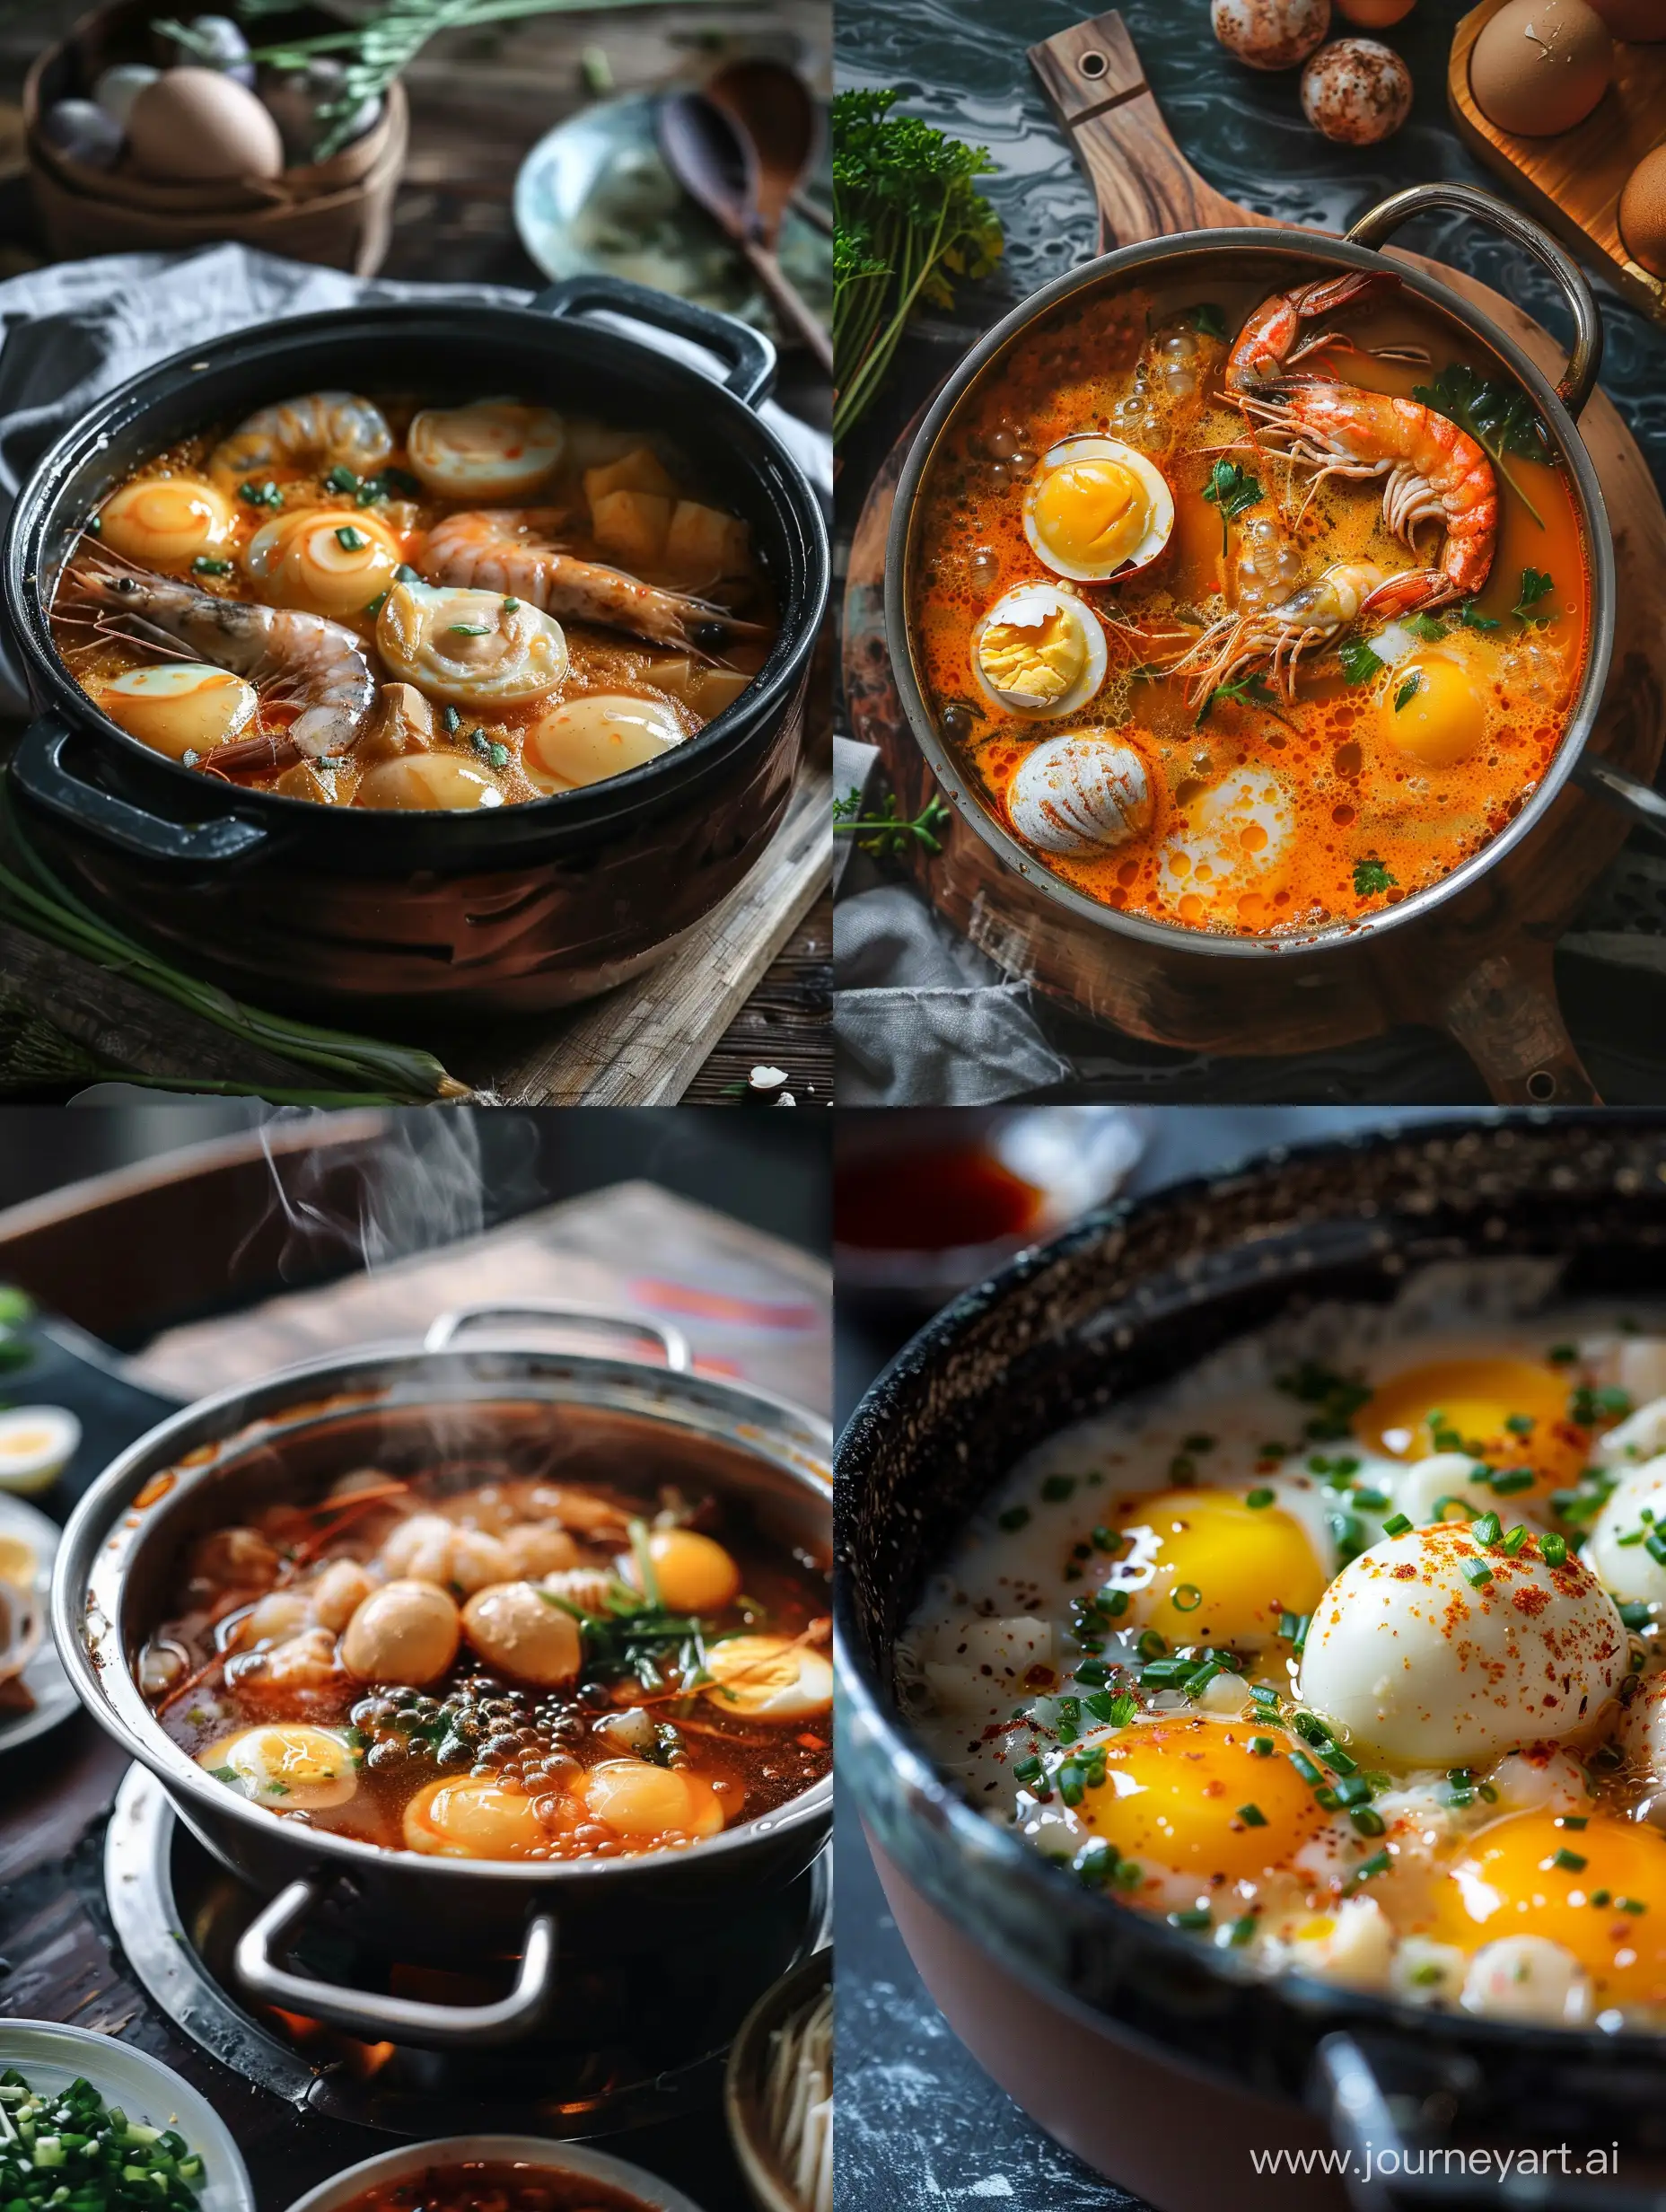 Delicious-Seafood-Steamed-Eggs-in-a-Hot-Pot